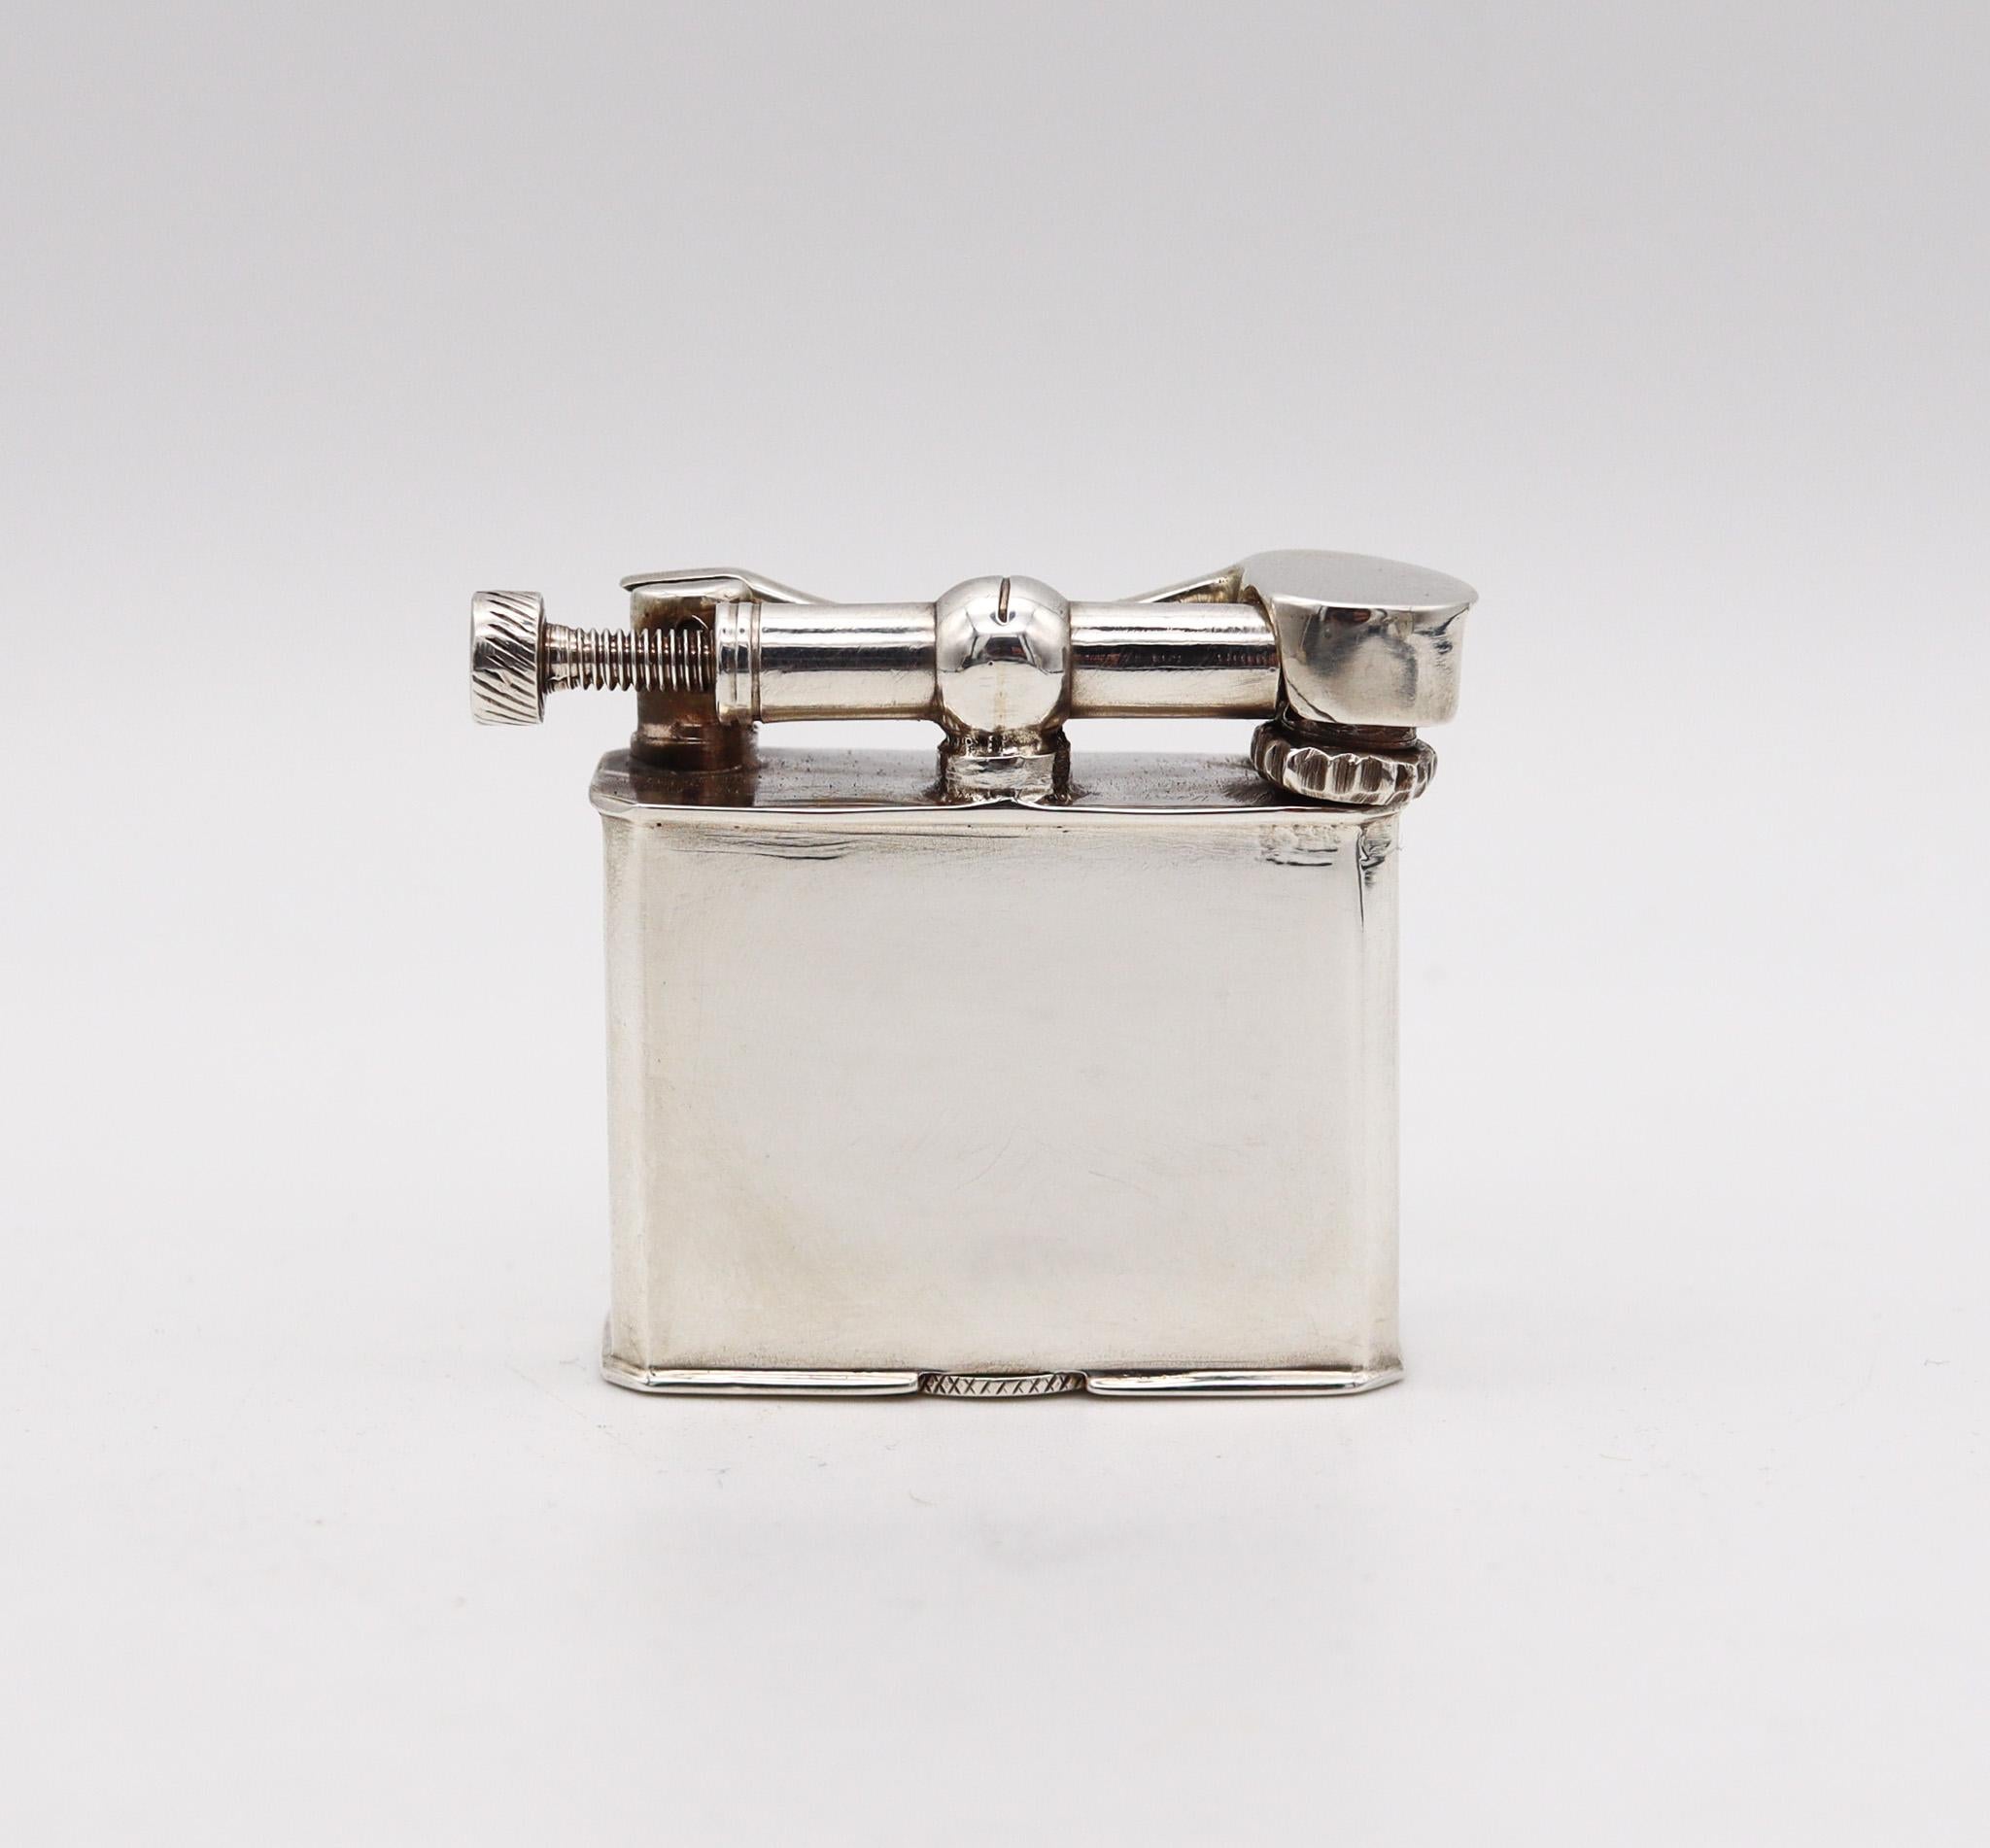 Lift arm petrol lighter made in Mexico

Beautiful lift arm petrol lighter, created in Taxco Mexico during the late Art Deco period, circa 1940. It was crafted in solid .925/.999 sterling silver with high polished finish. The system of this lighter